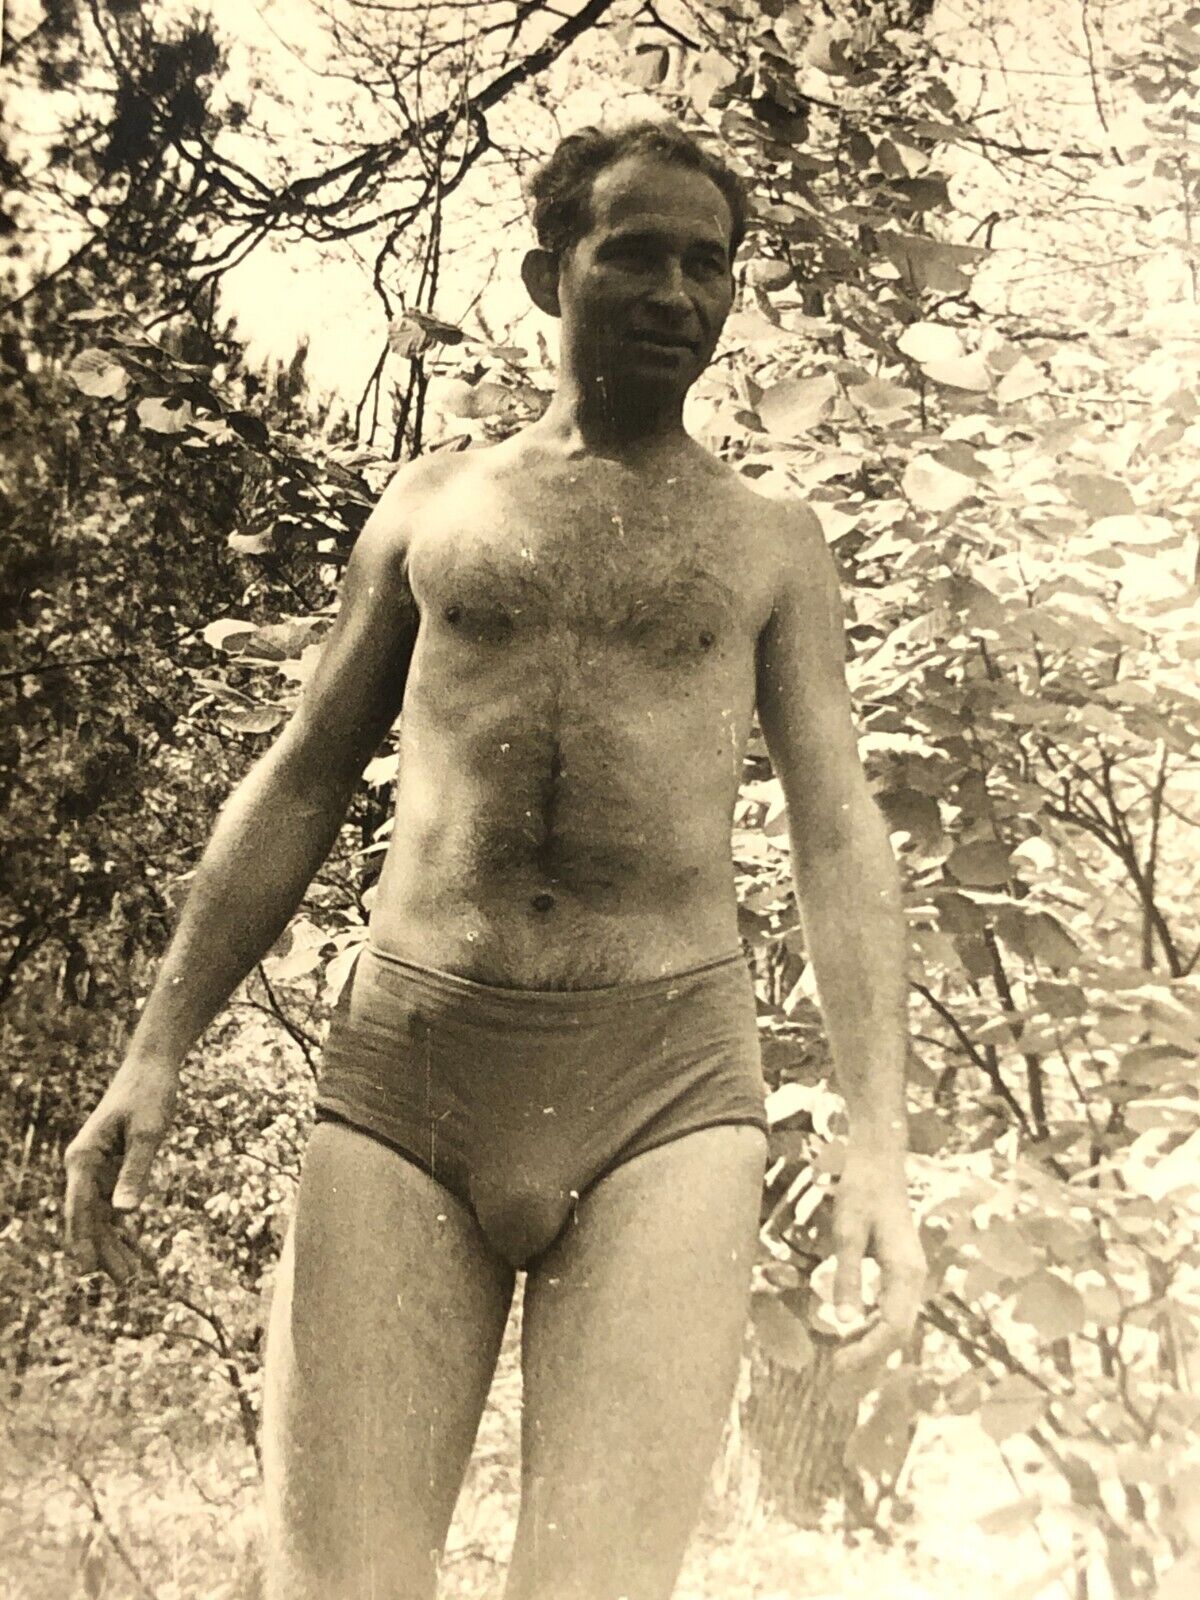 1960s Shirtless Slim Guy Trunks Bulge Hairy chest Gay int Vintage Photo